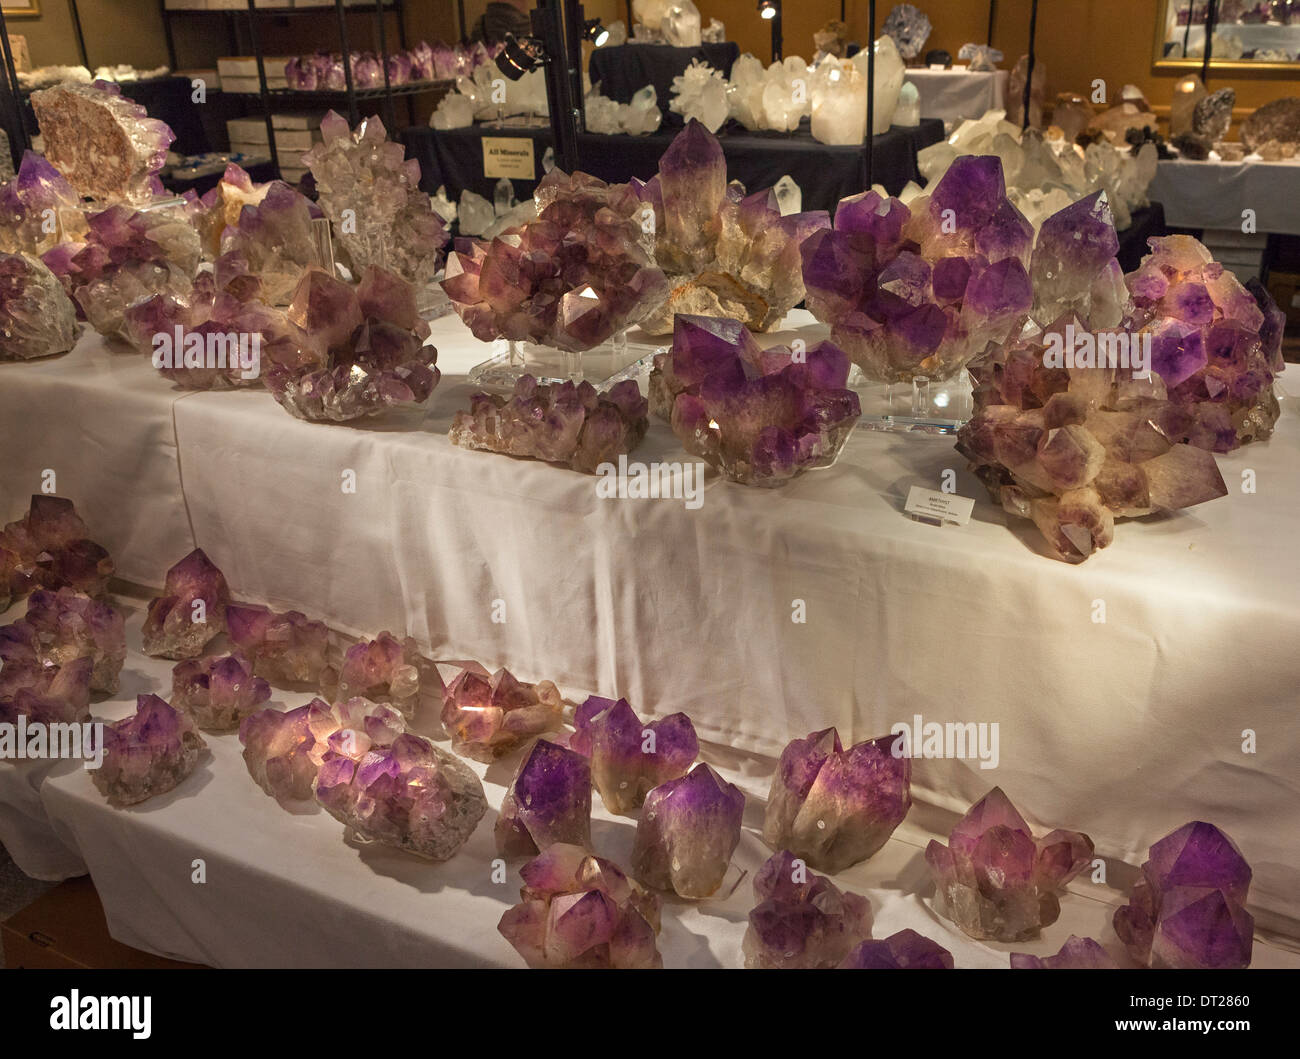 large amethyst crystals displayed for sale at the annual Gem and Mineral Show in Tucson, Arizona Stock Photo